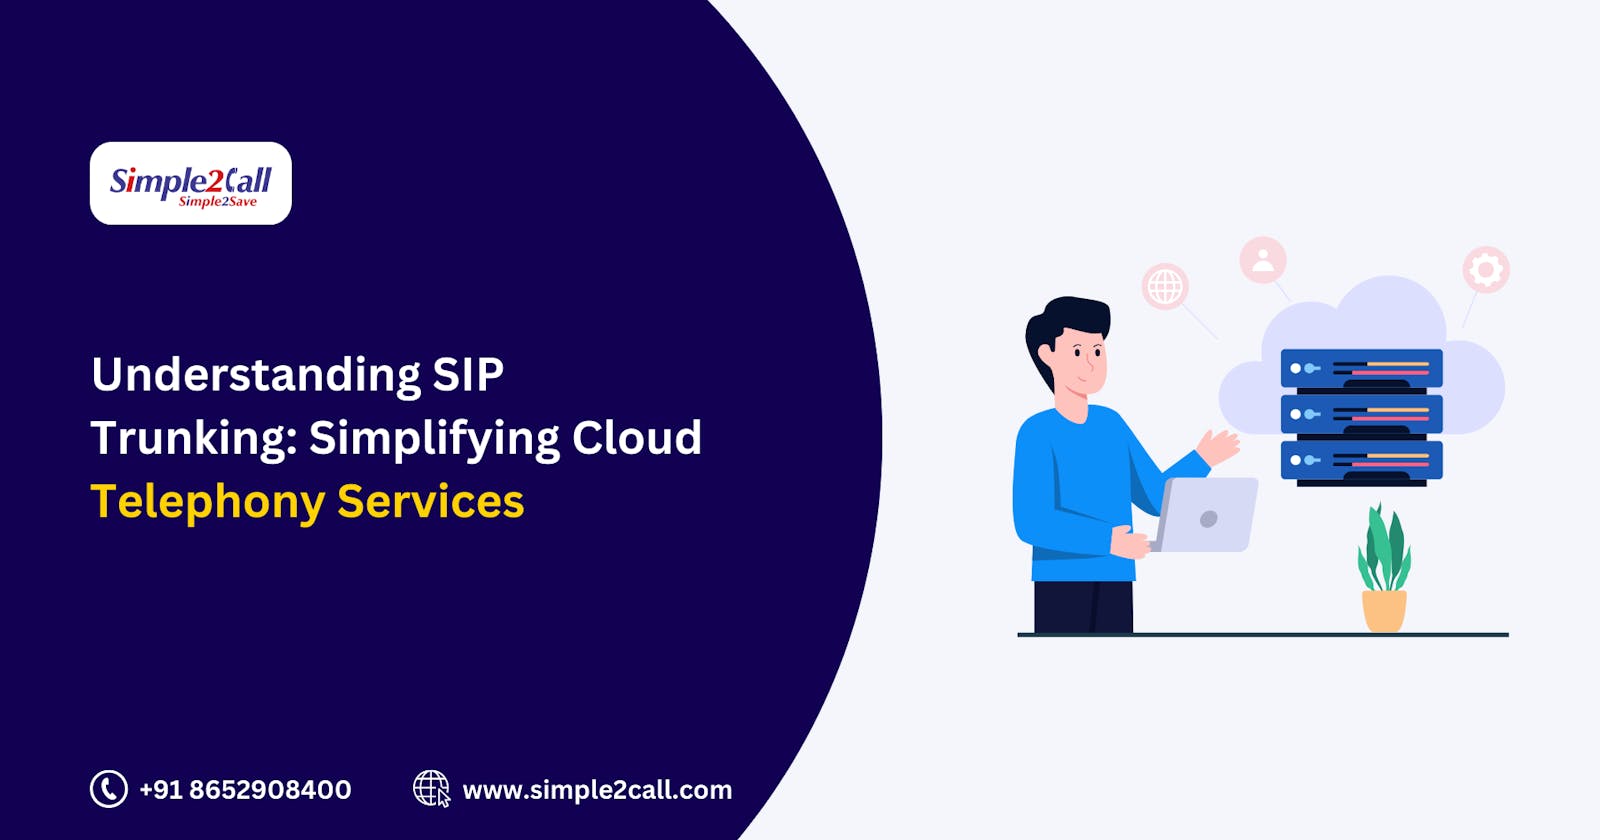 Understanding SIP Trunking: Simplifying Cloud Telephony Services